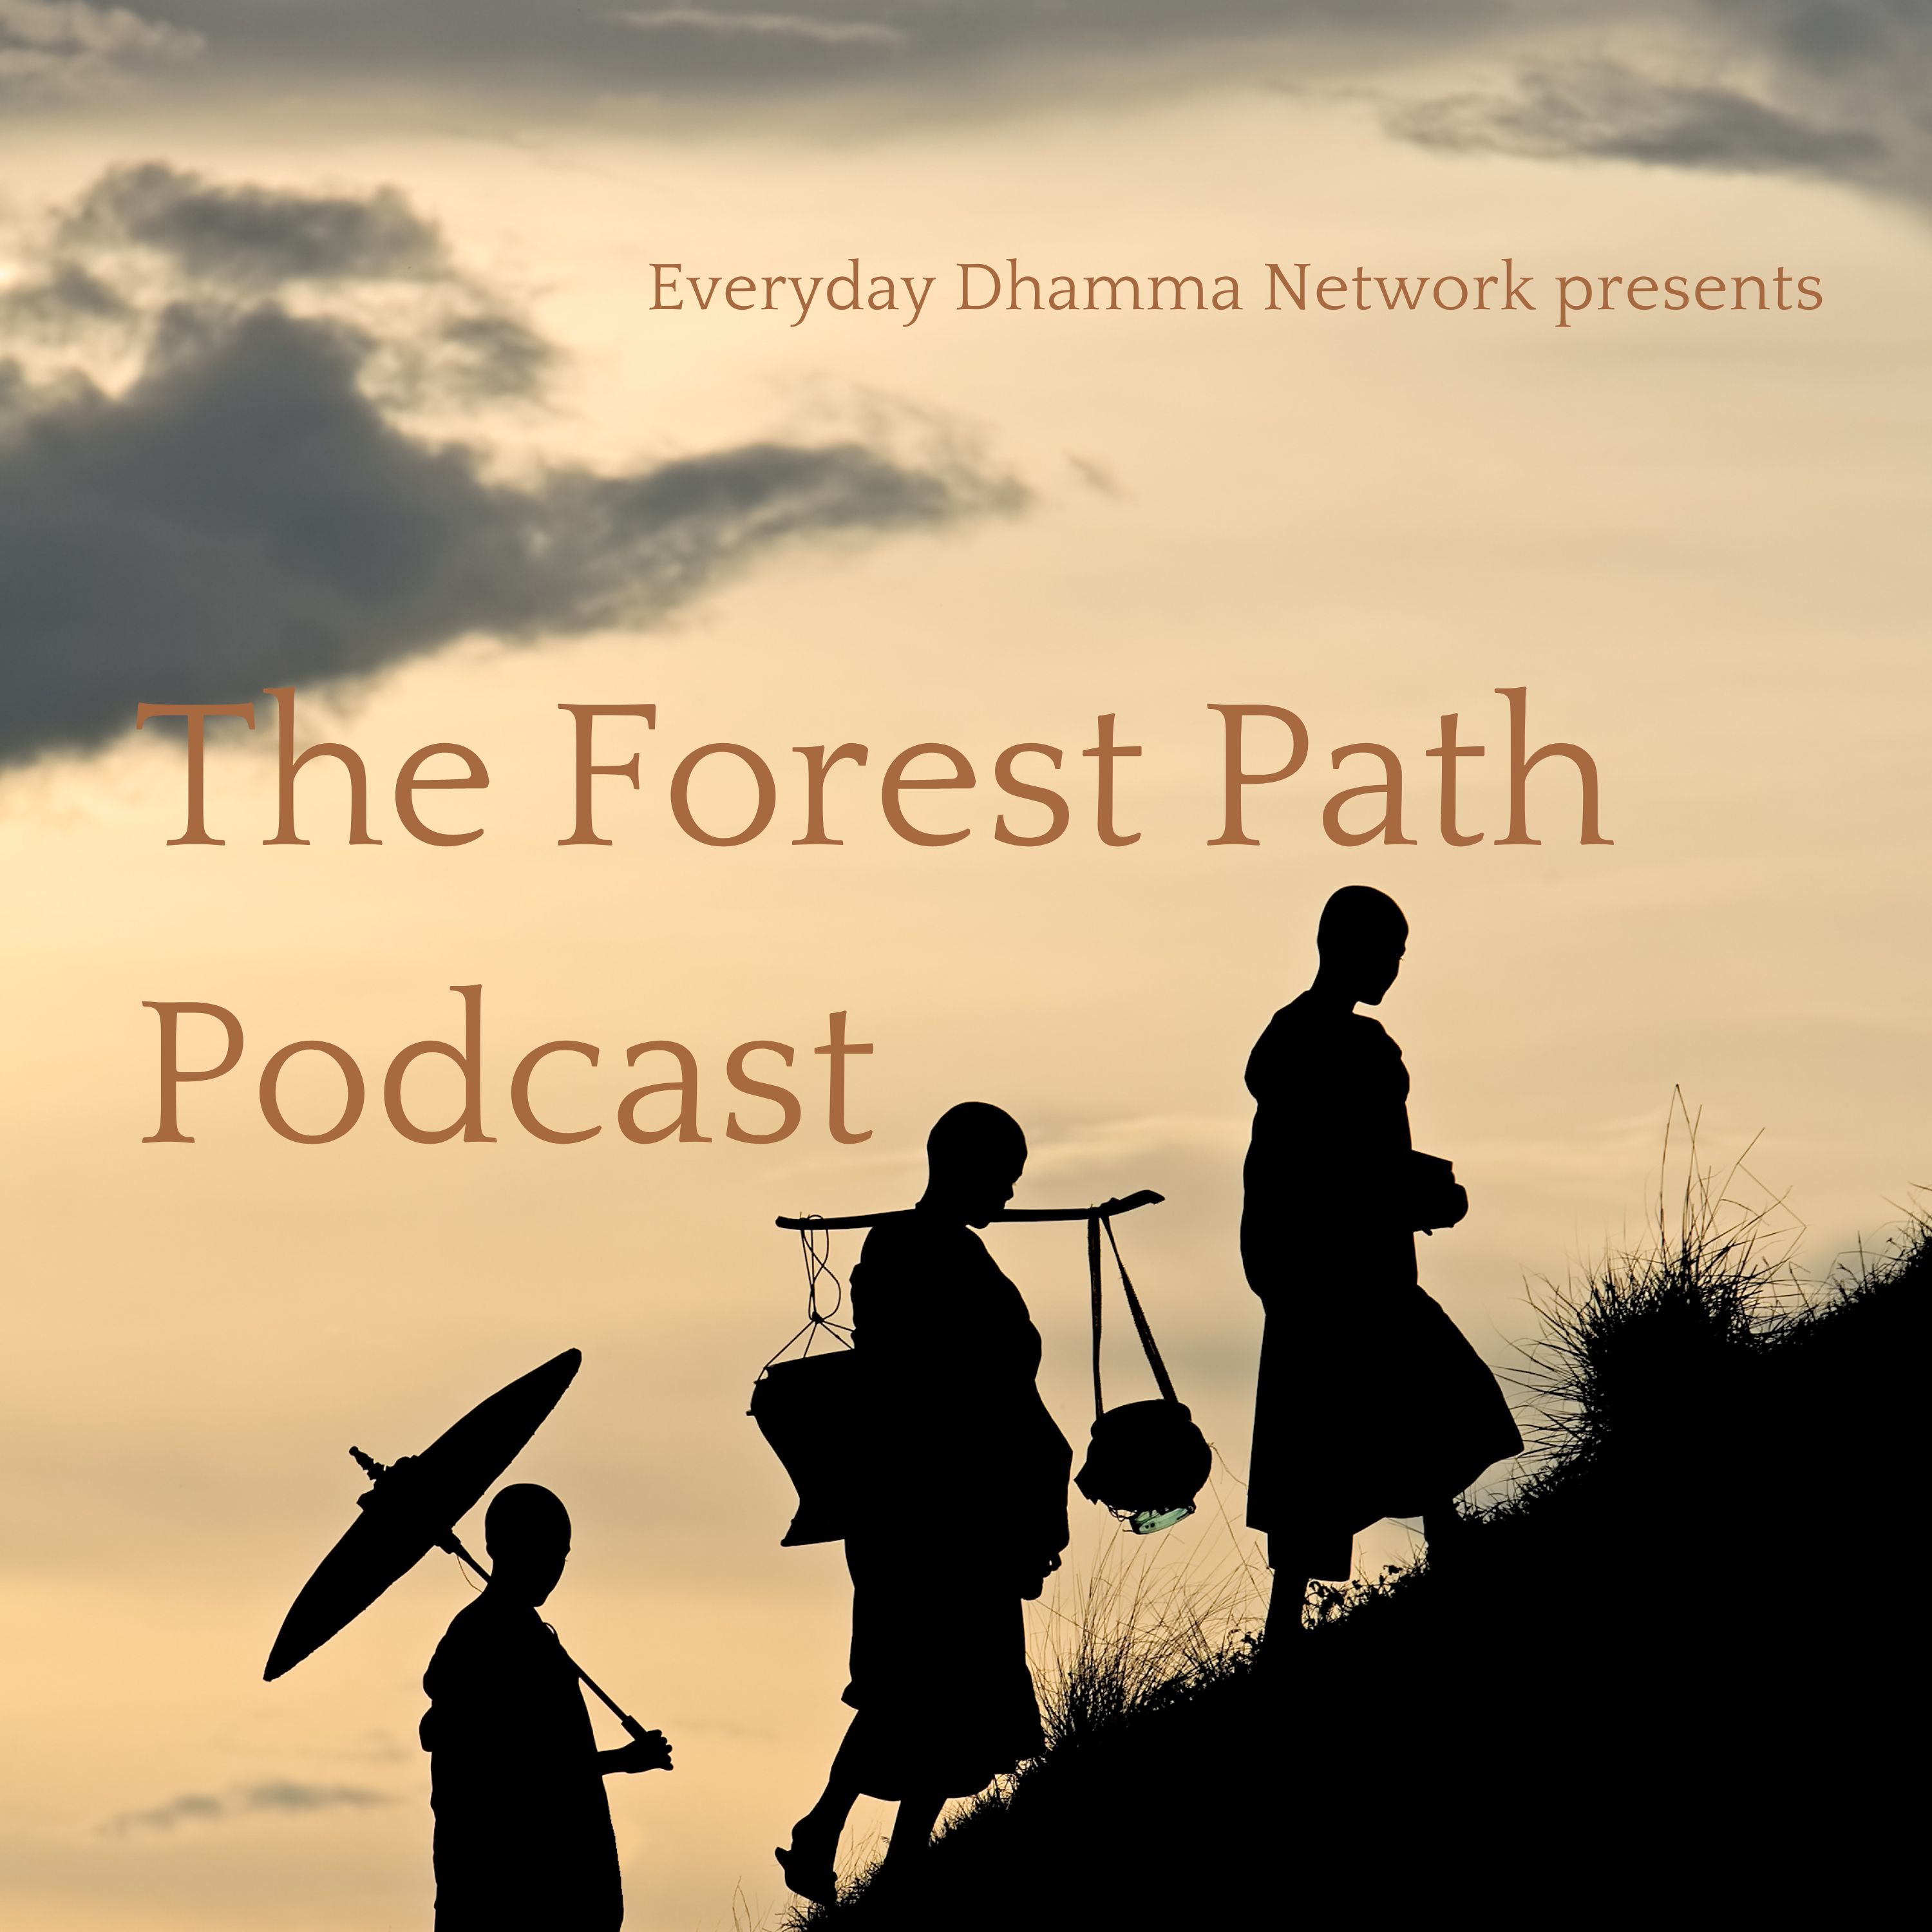 The Forest Path Podcast